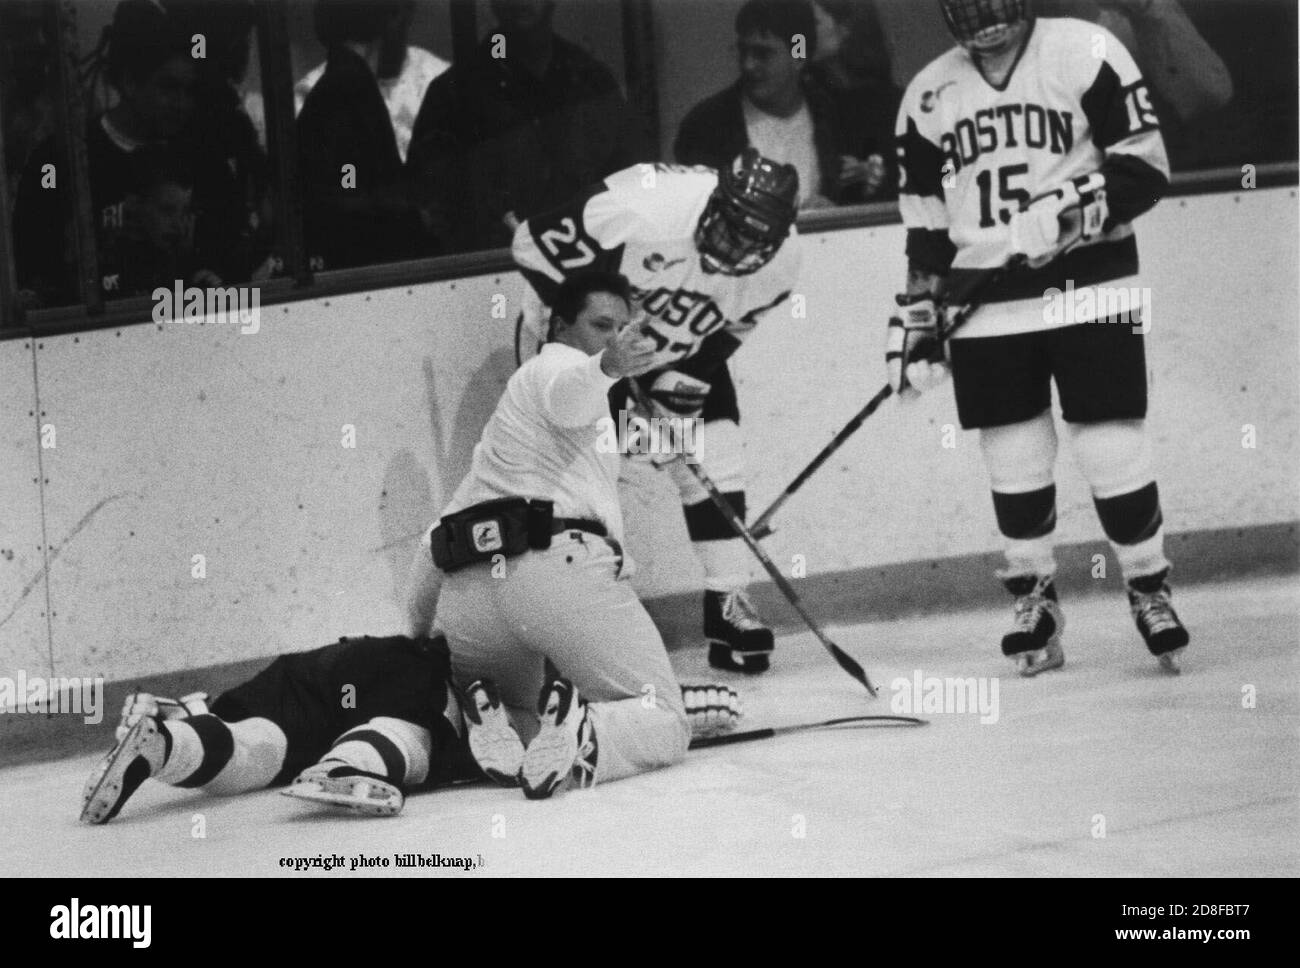 Exclusive images of Injured Boston University Hockey player Travis Roy lies on the ice after striking the boards, Team trainersignals for the team doctor . Roy was paralyized in the by the injury. Exclusive photo by Bill belknap Dec 16,1998 Stock Photo